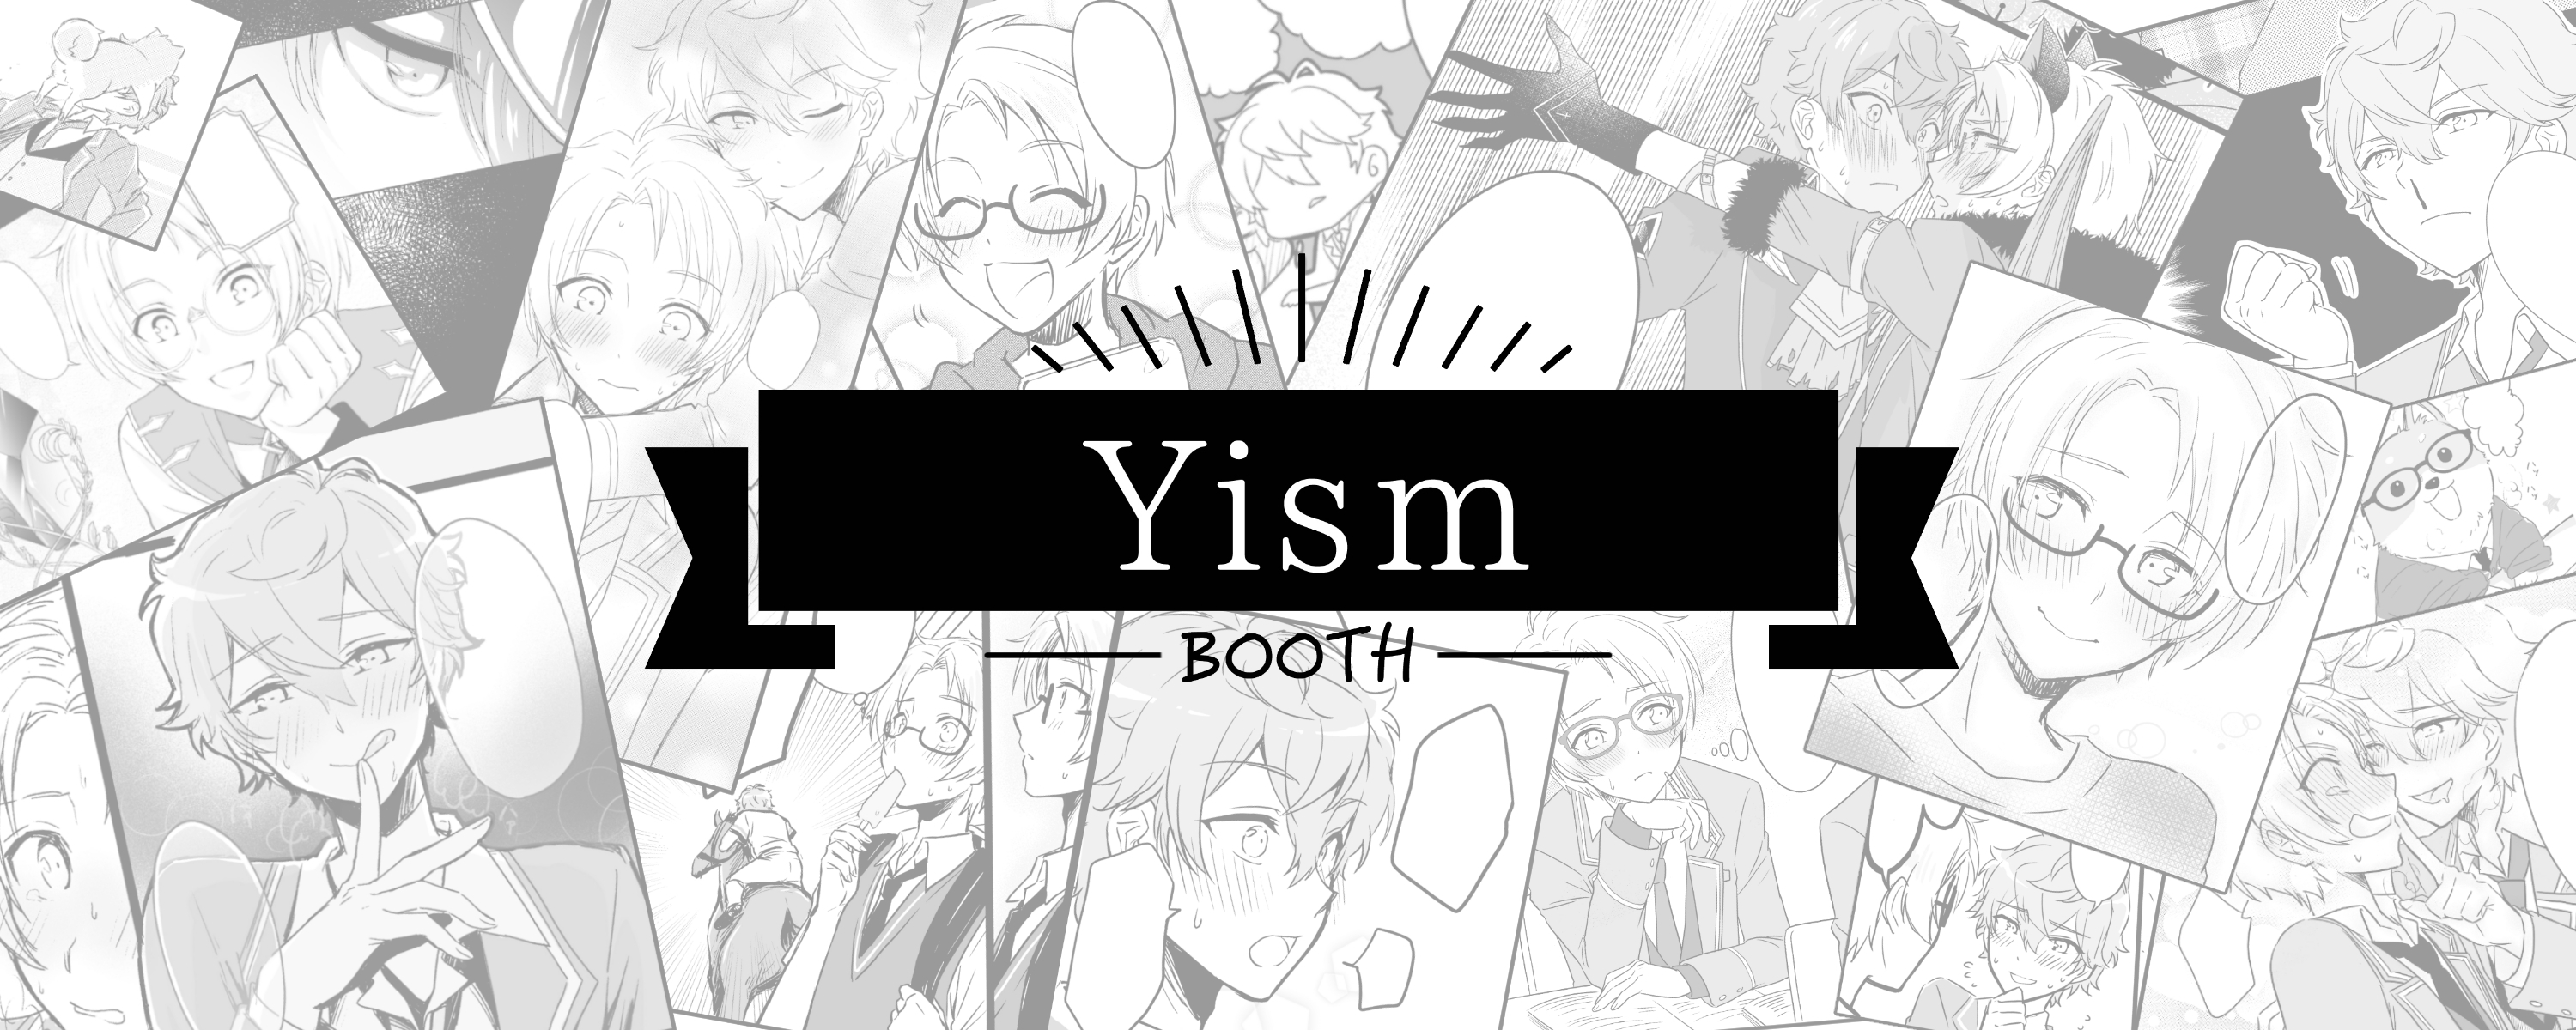 Yism-BOOTH-